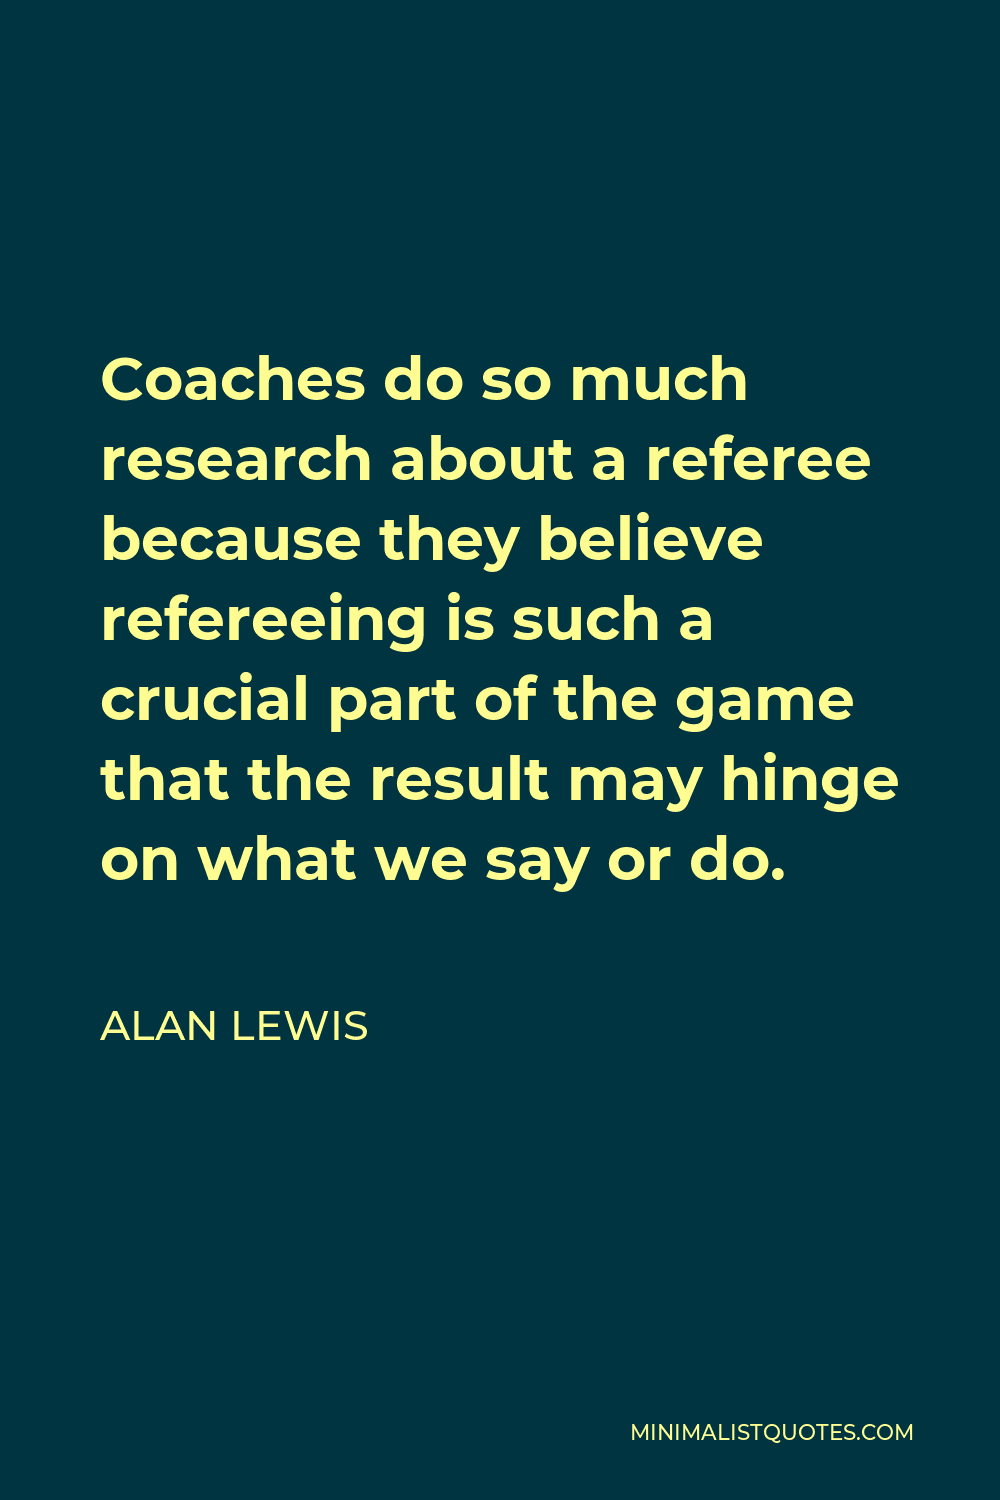 Alan Lewis Quote - Coaches do so much research about a referee because they believe refereeing is such a crucial part of the game that the result may hinge on what we say or do.